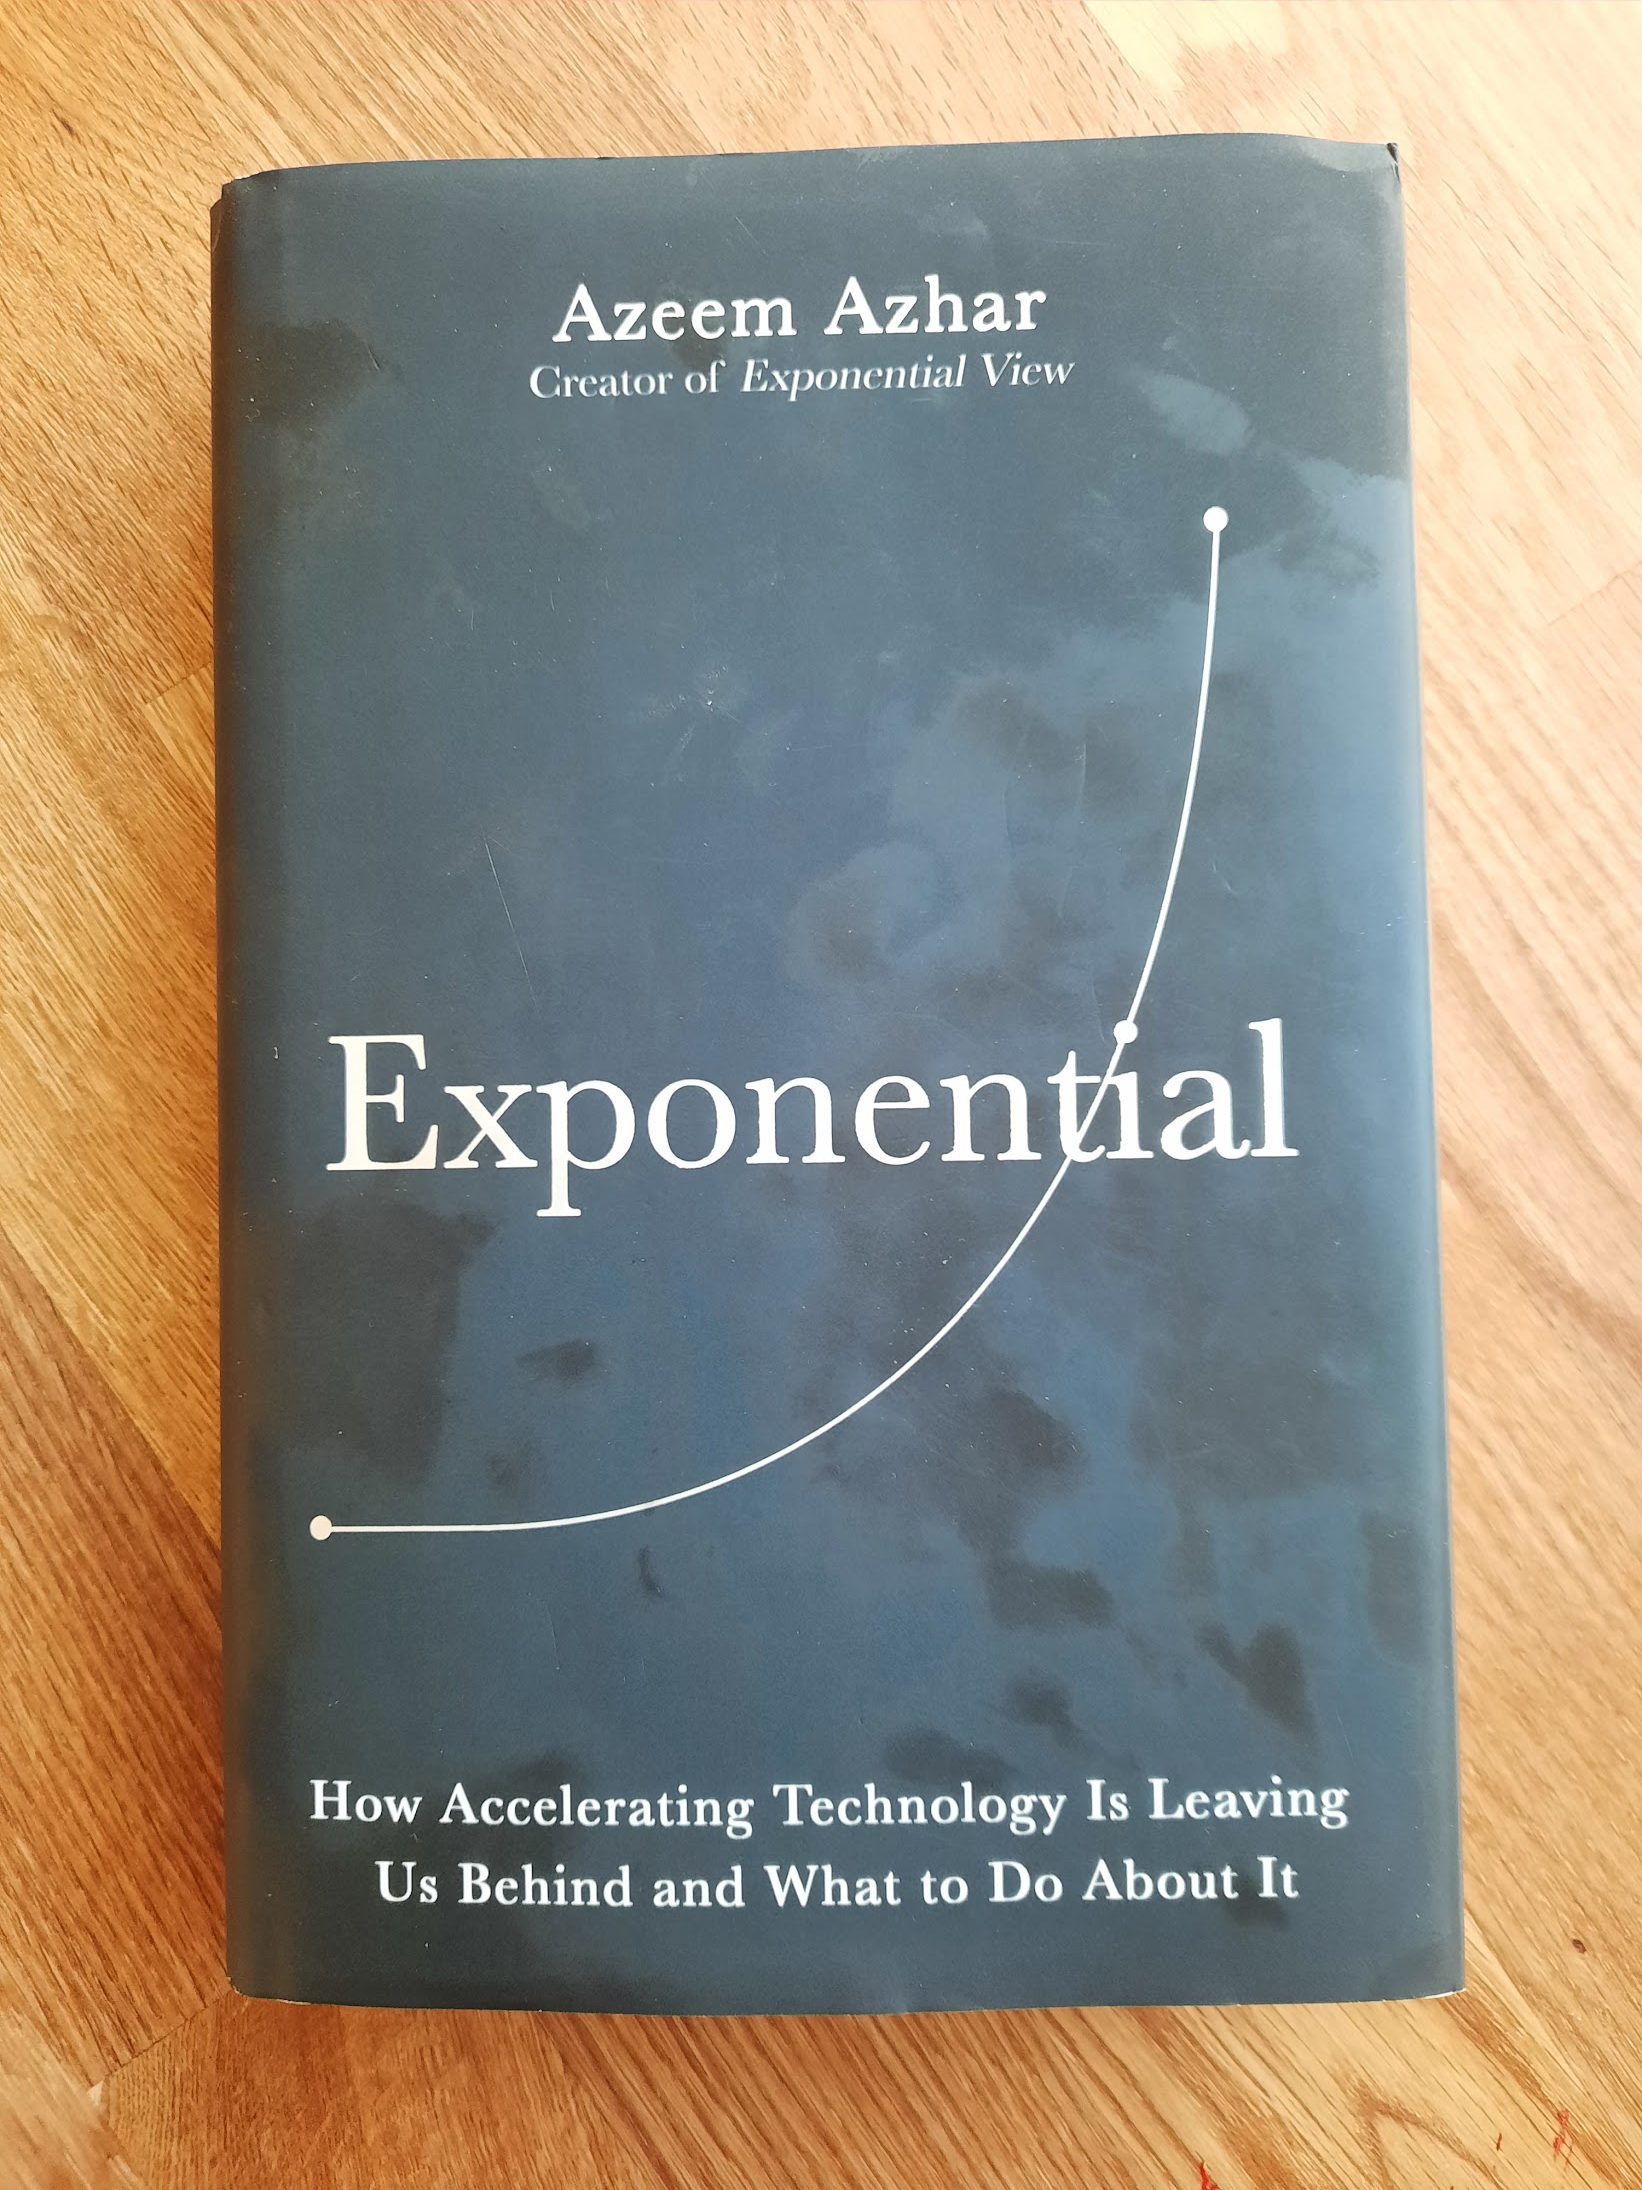 Whats On The Bookshelf: Exponential By Azeem Azhar